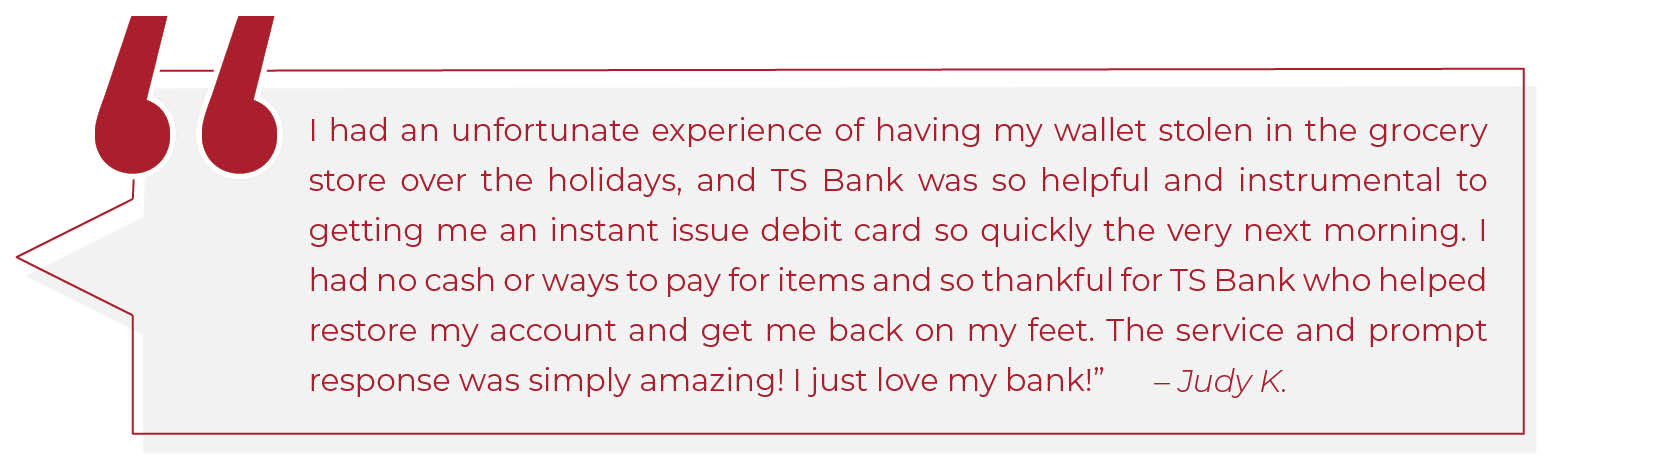 client quote about instant issue debit card